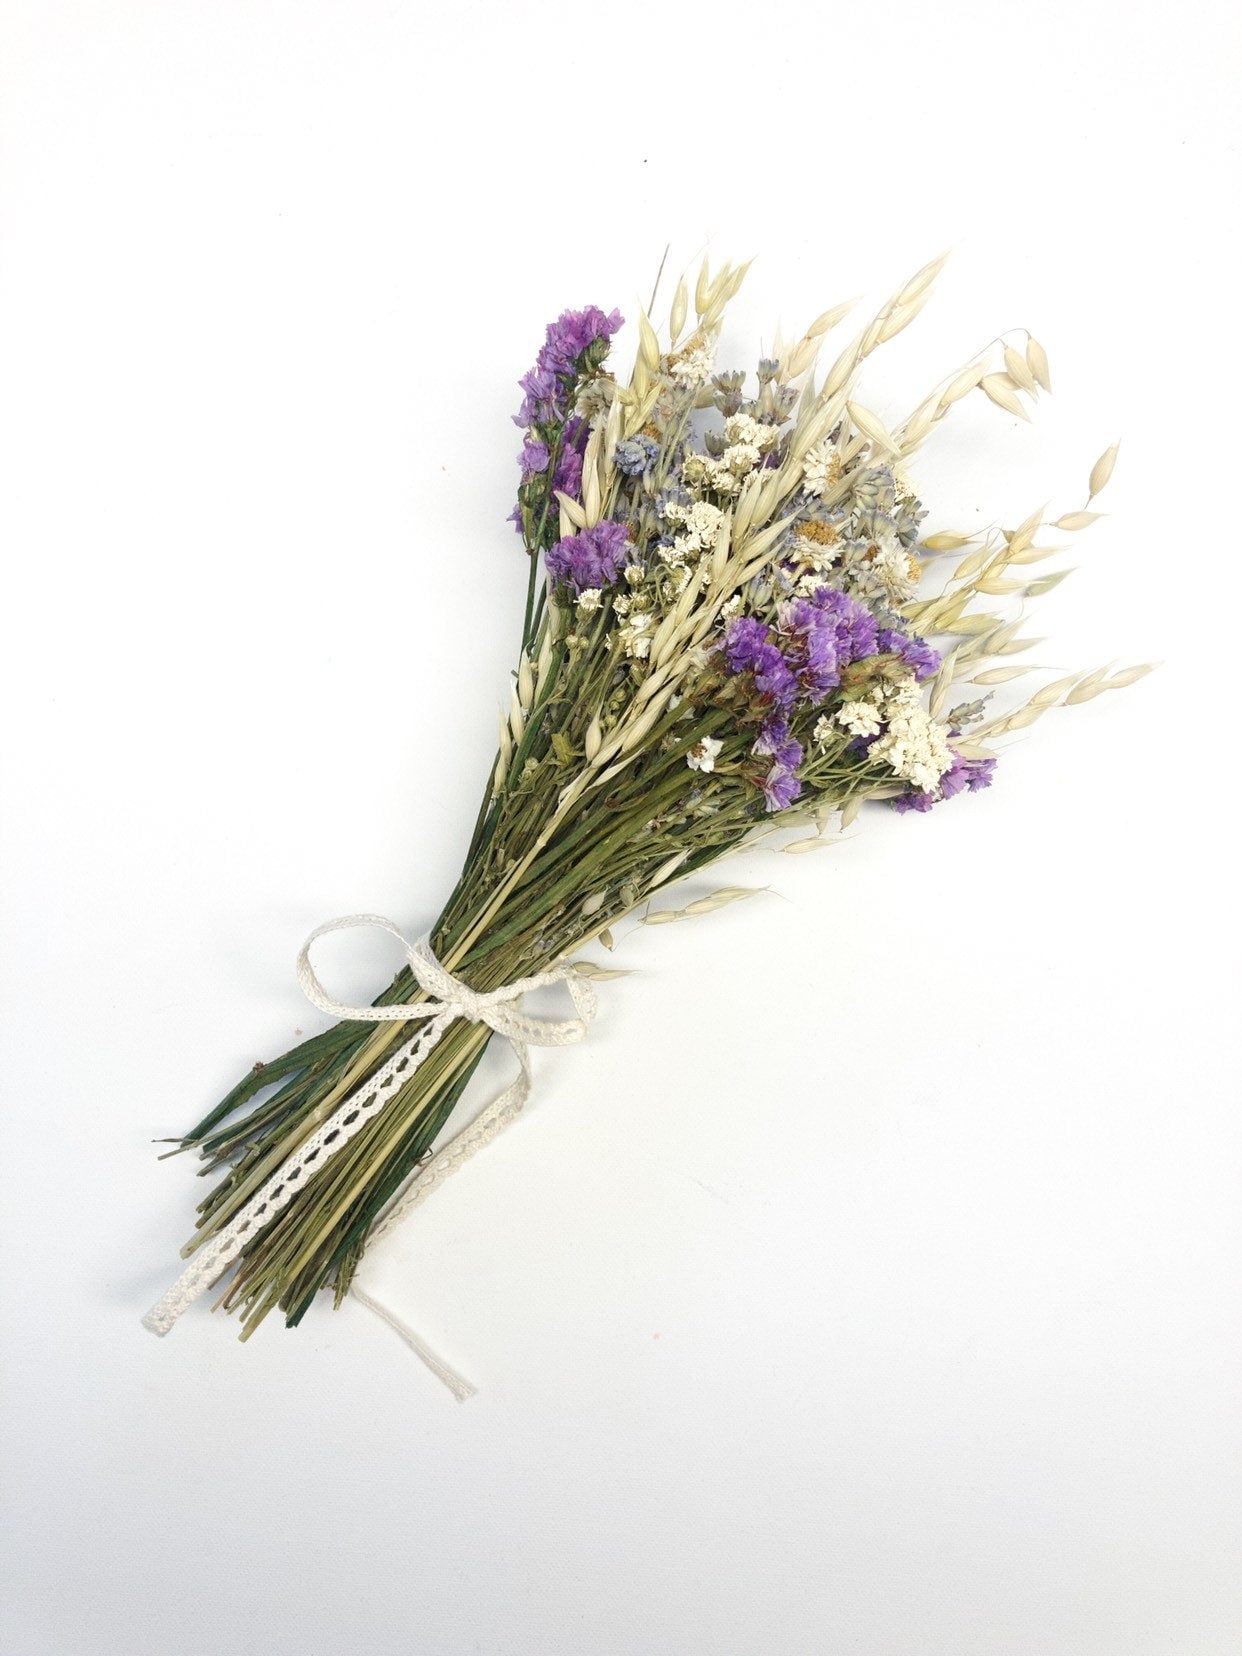 Purple Bouquet, Dried Oats, Lavender, Preserved Sinuata Statice, Spring, Purple, Violet, White, Ammonium, Preserved Flowers, Bridal, Wedding